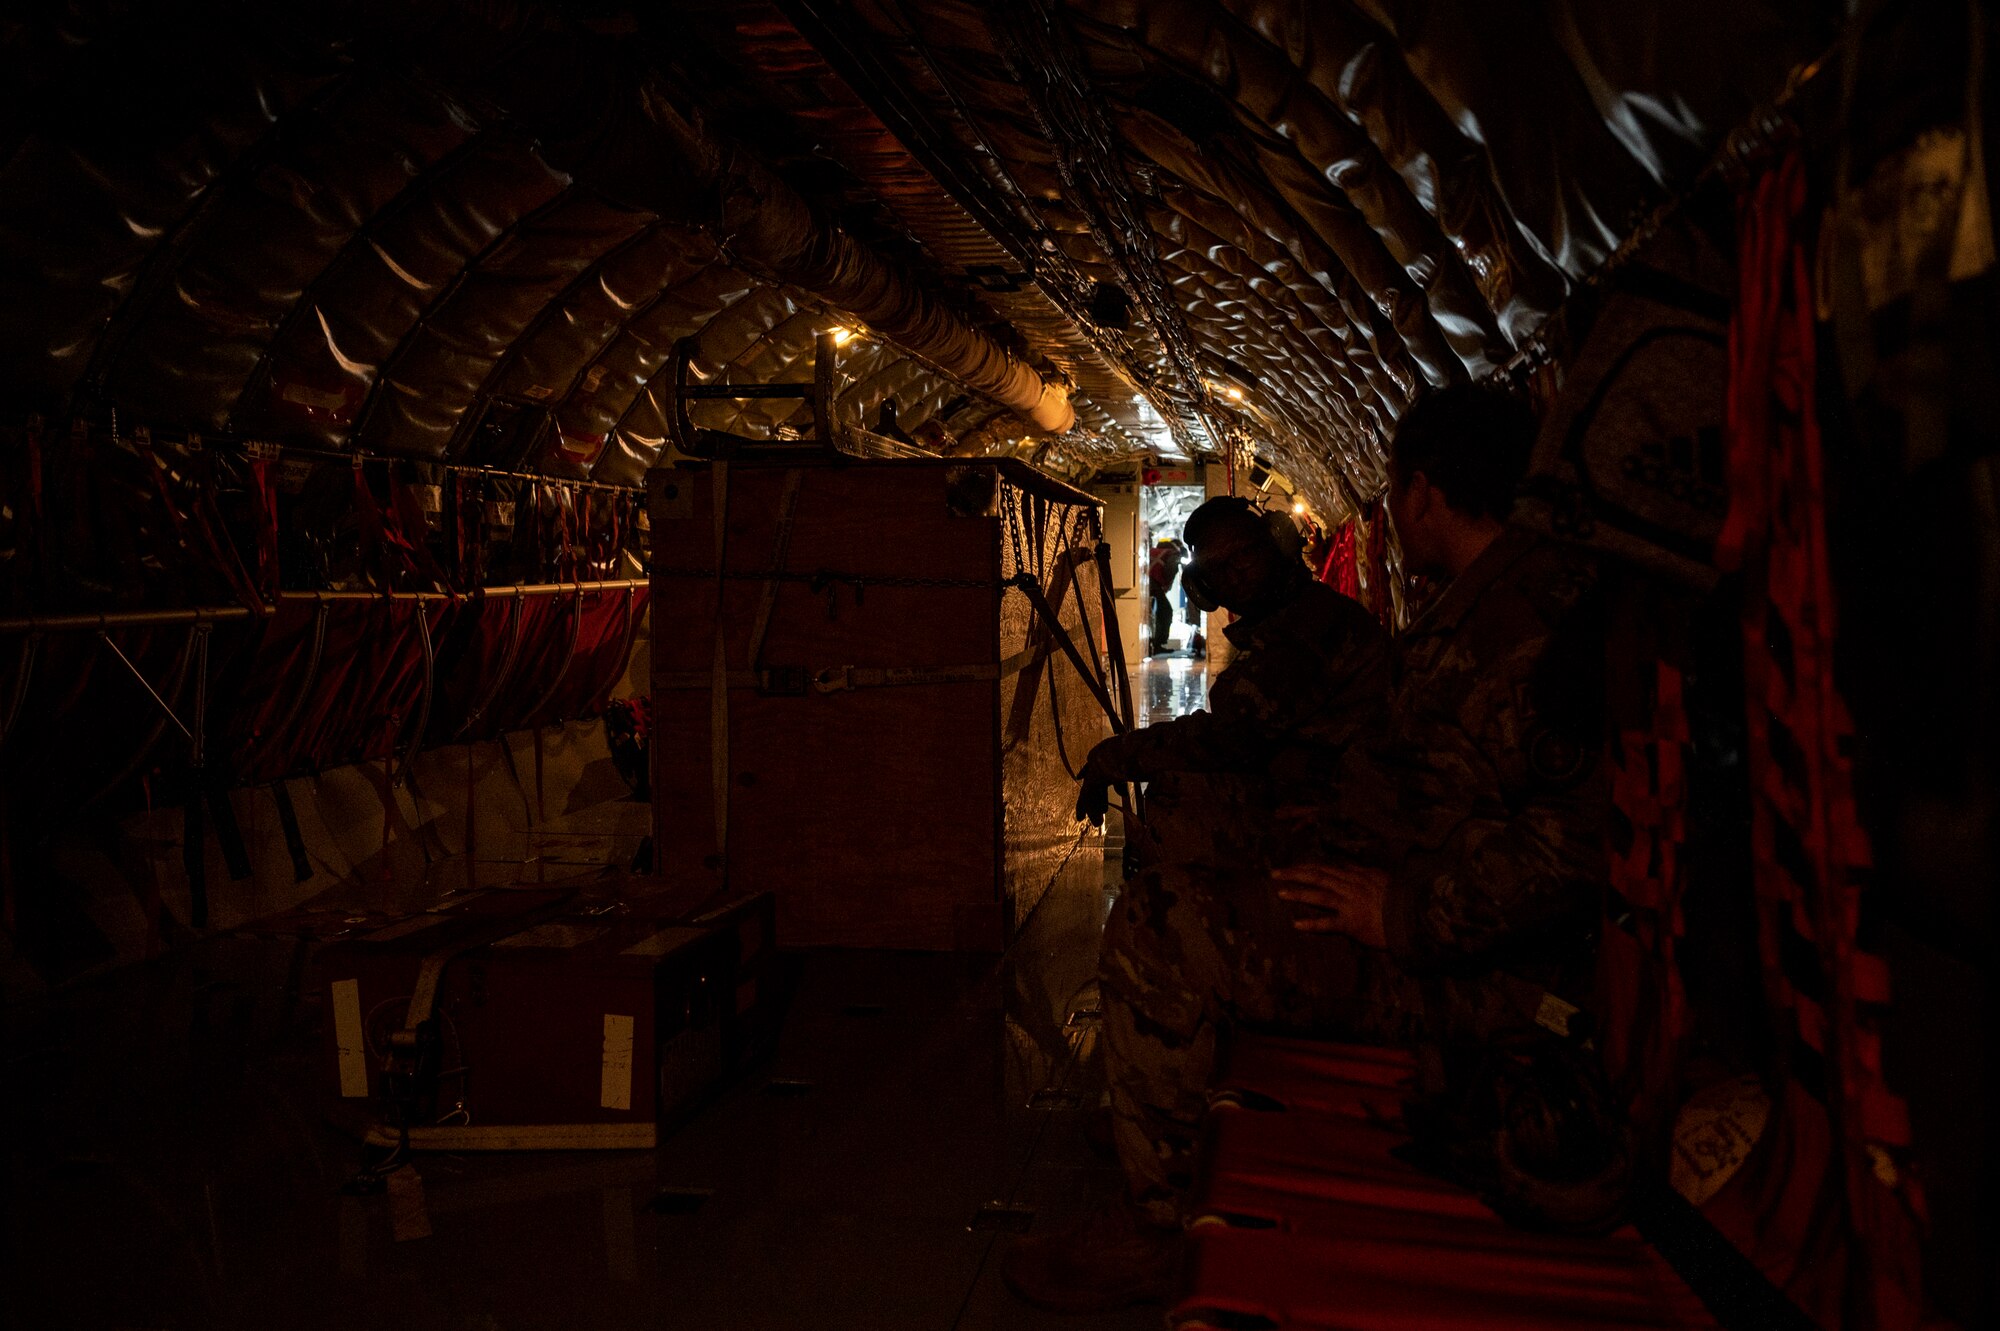 Airmen look in the cockpit of an airplane.